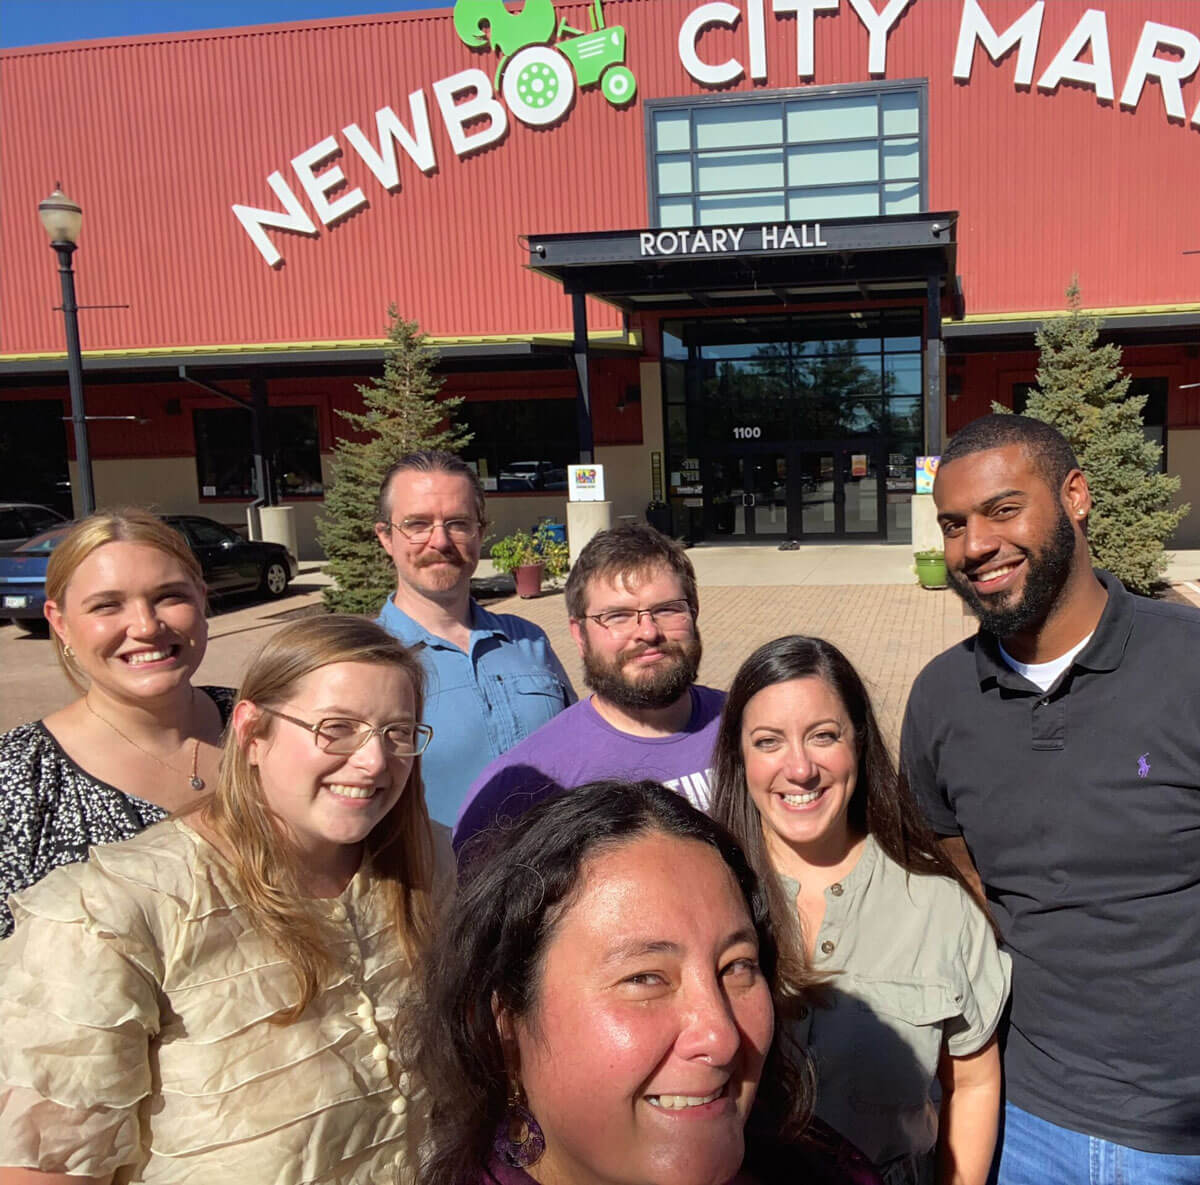 NewBo City Market staff stands outside of the front of the NewBo City Market